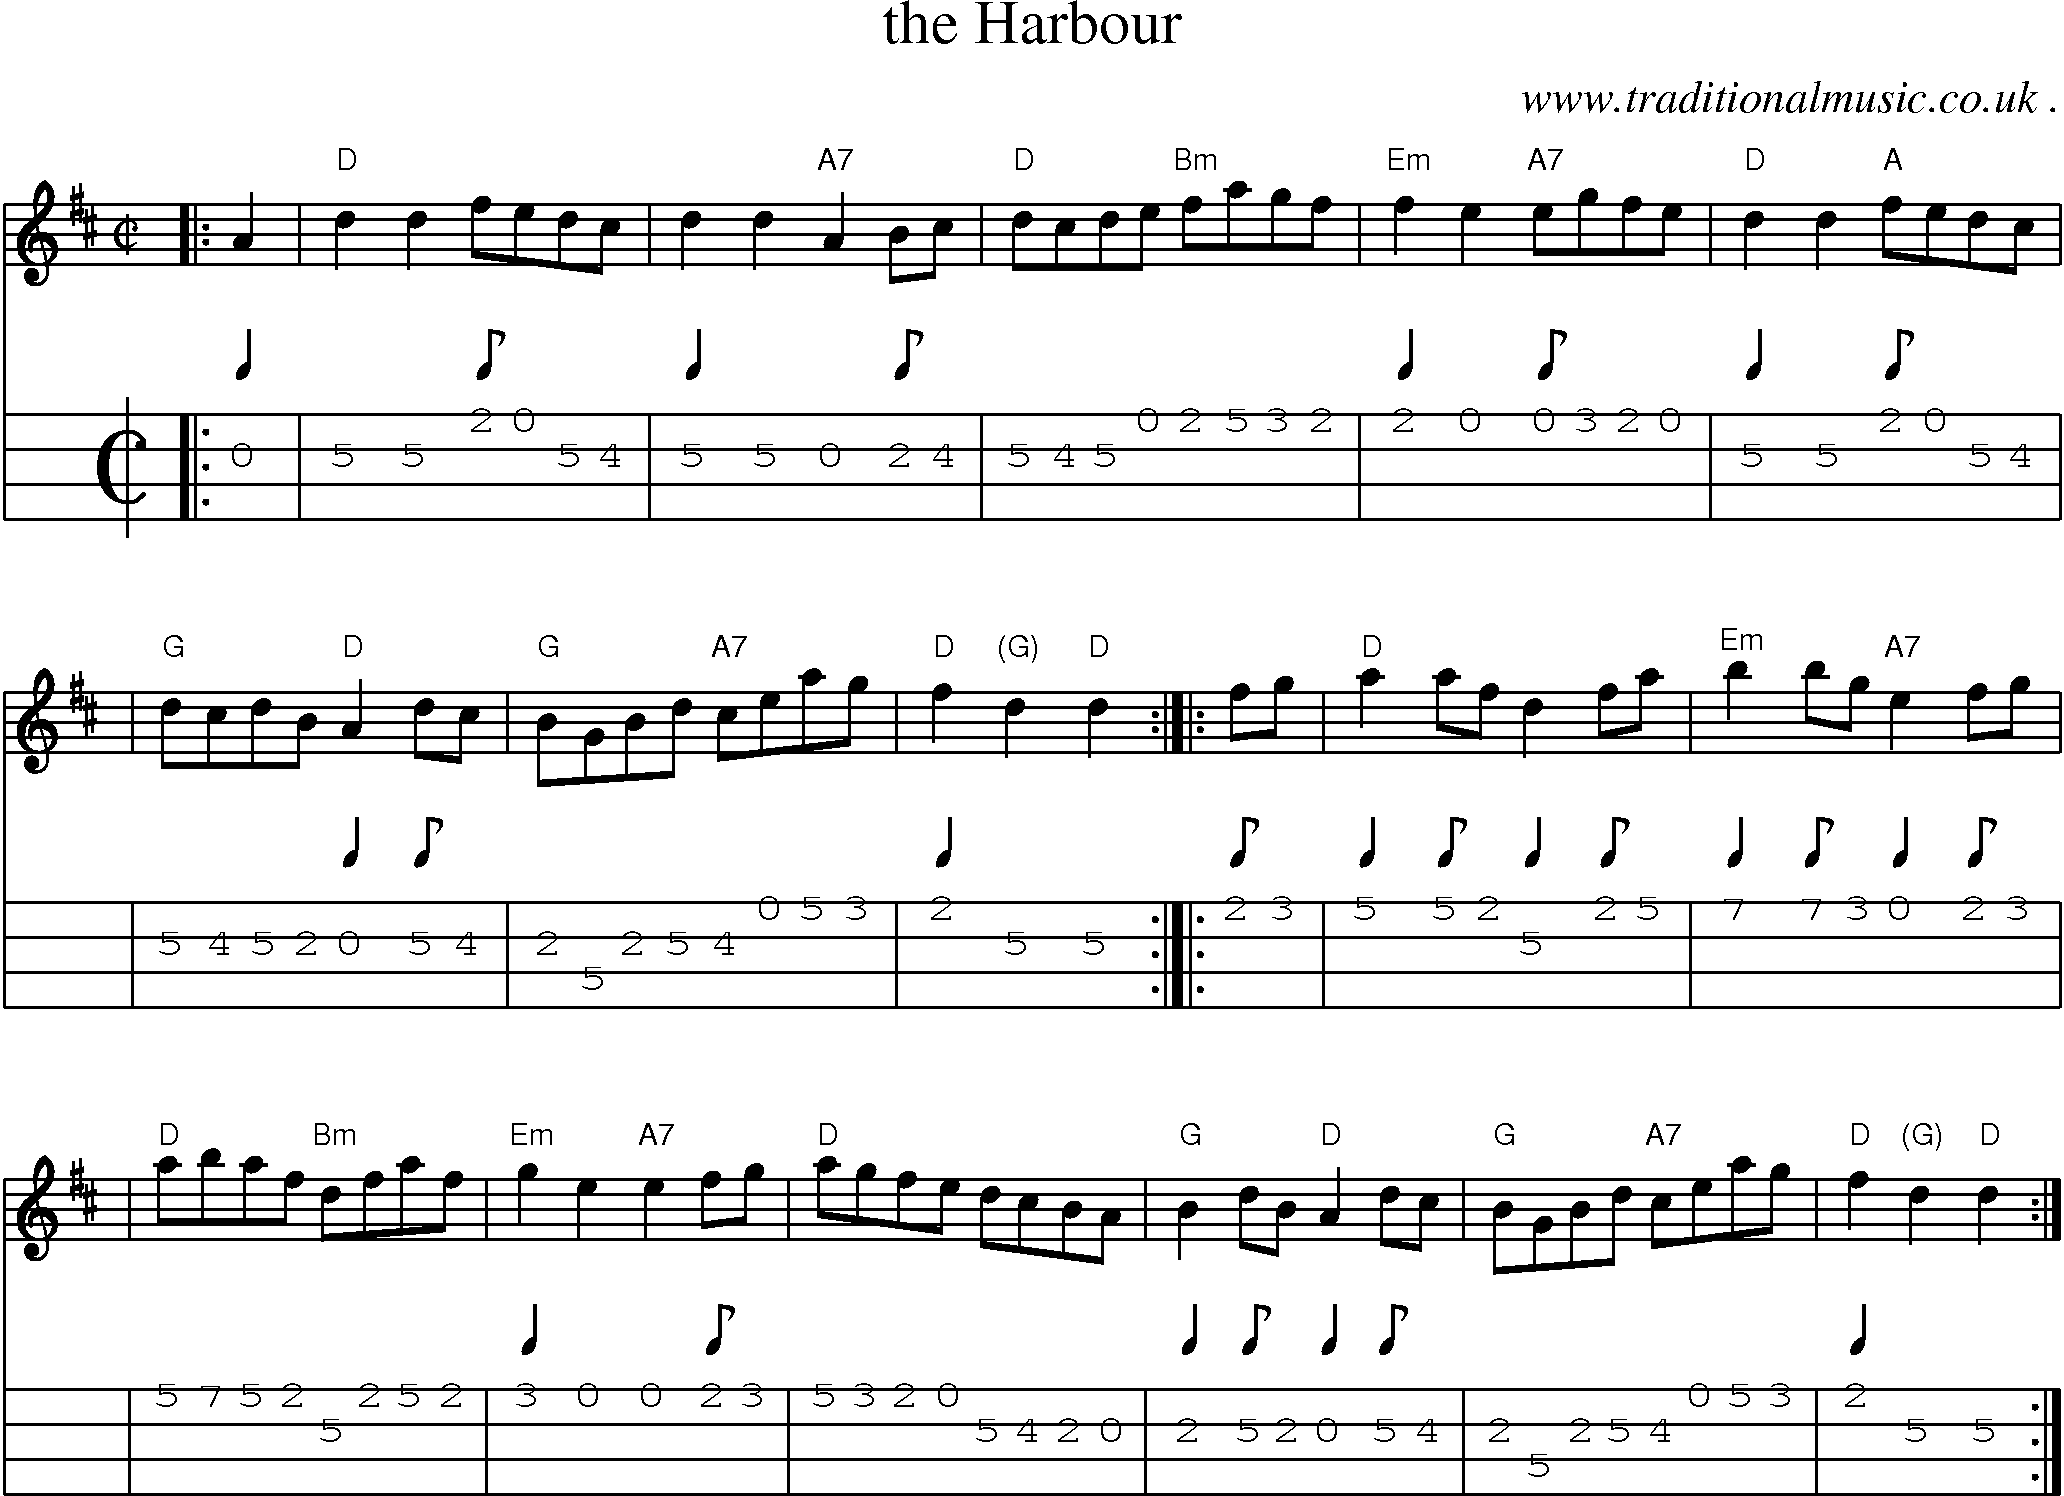 Sheet-music  score, Chords and Mandolin Tabs for The Harbour